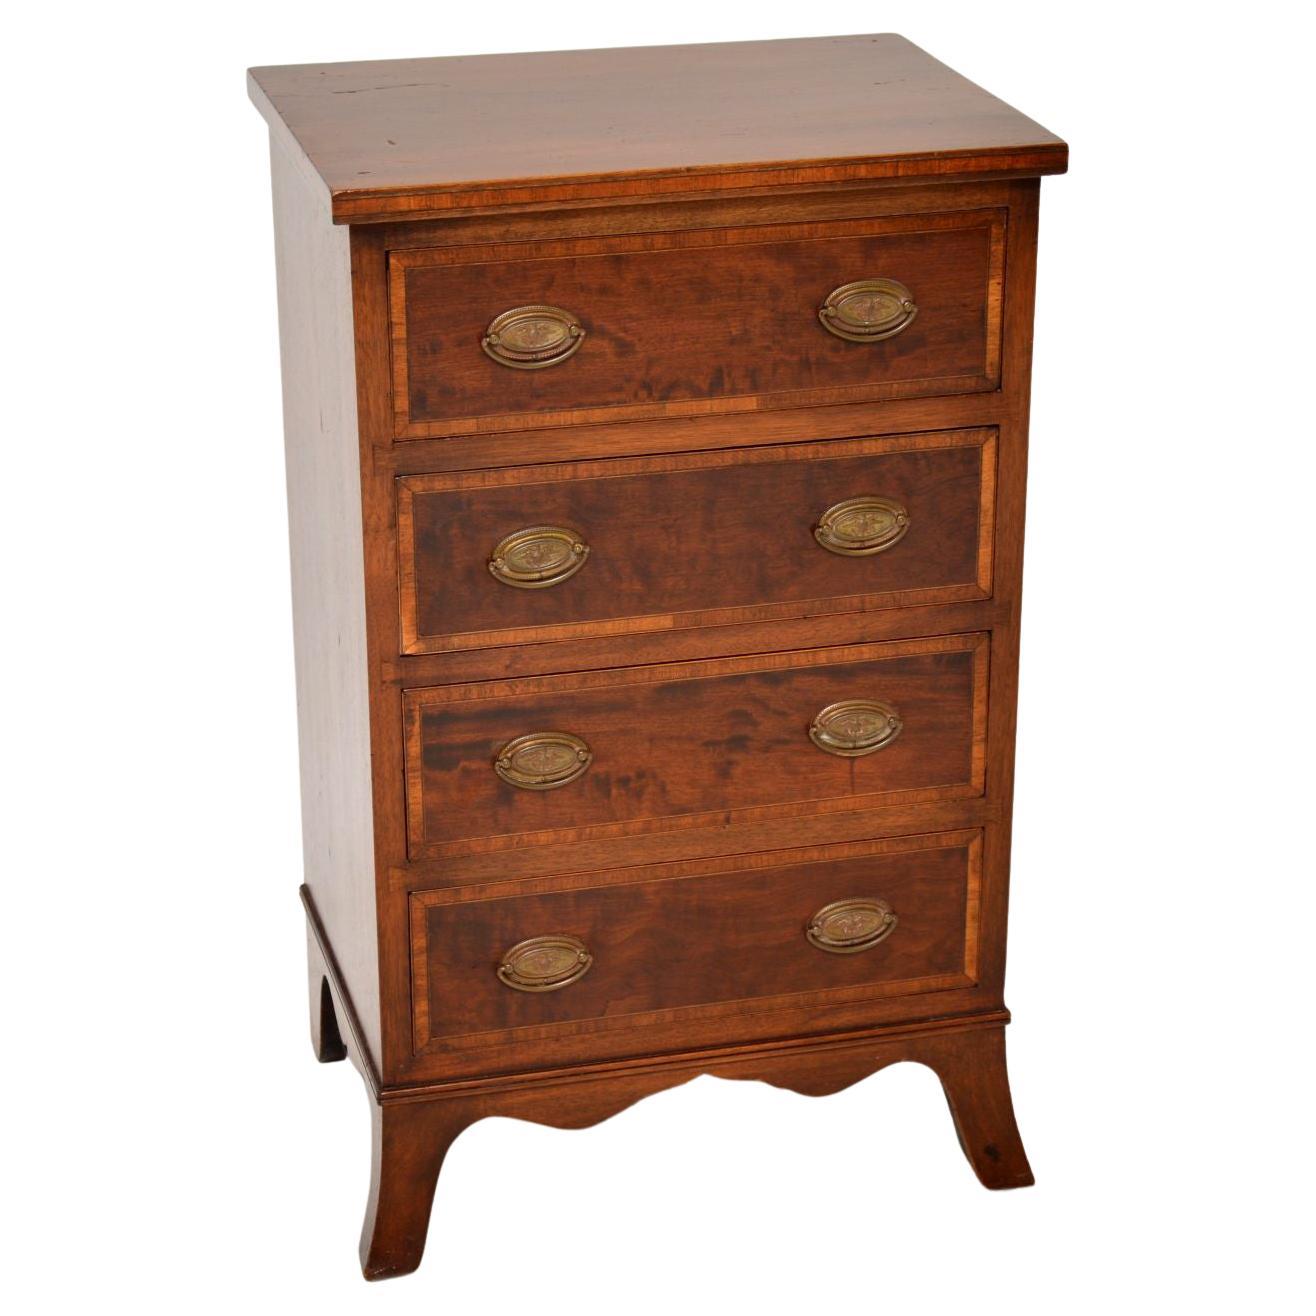 Antique Satinwood Inlaid Edwardian Chest of Drawers